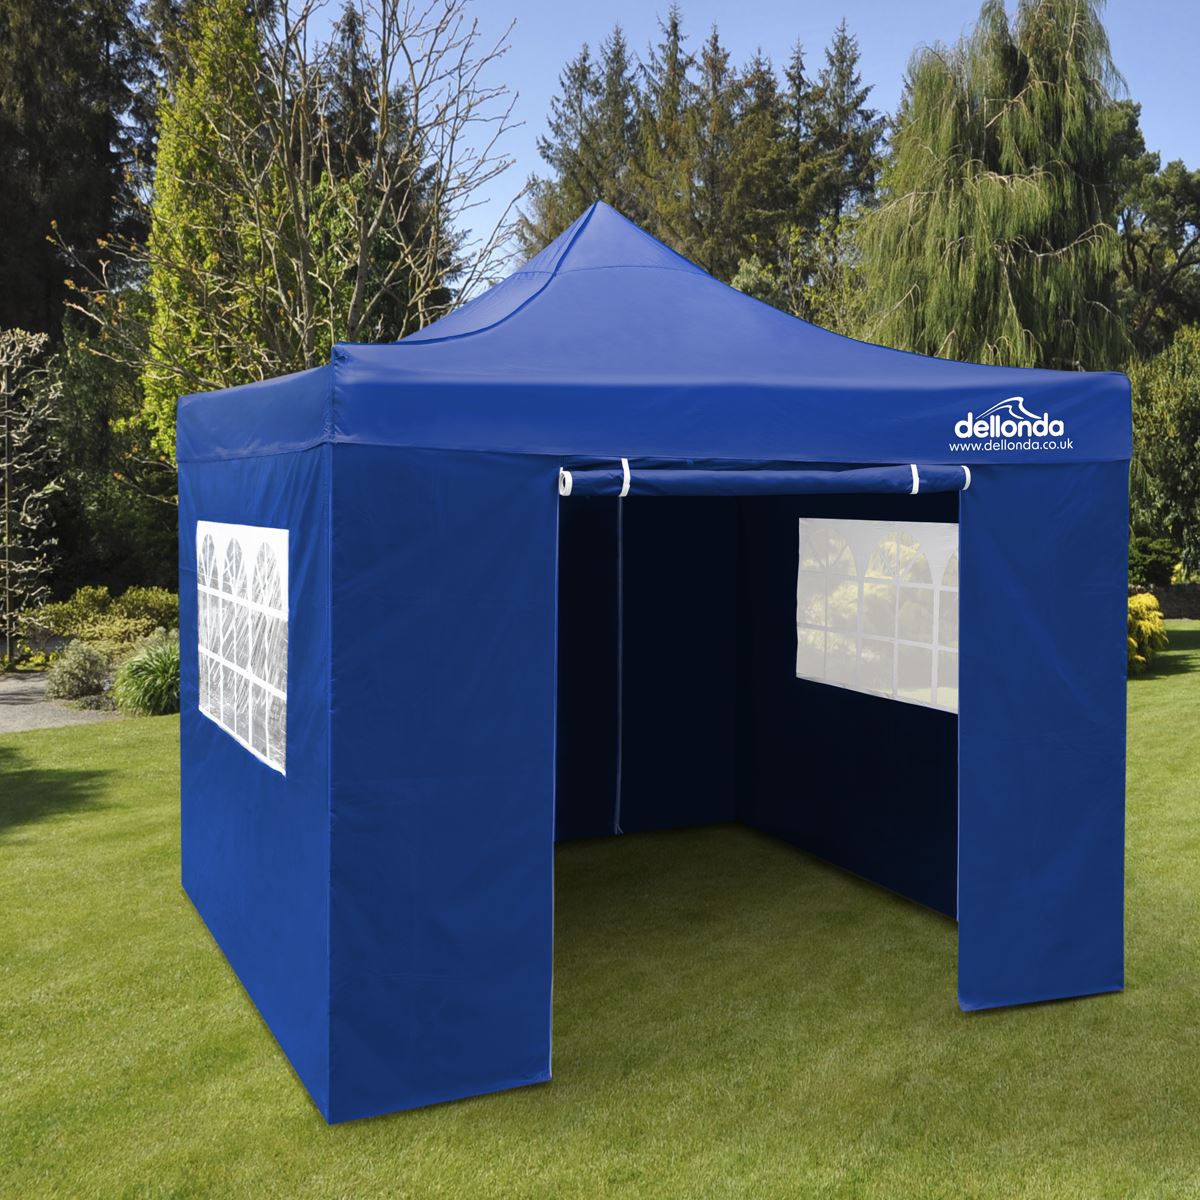 Dellonda Premium 2x2m Pop-Up Gazebo & Side Walls, PVC Coated, Water Resistant Fabric, Supplied with Carry Bag, Rope, Stakes & Weight Bags - Blue